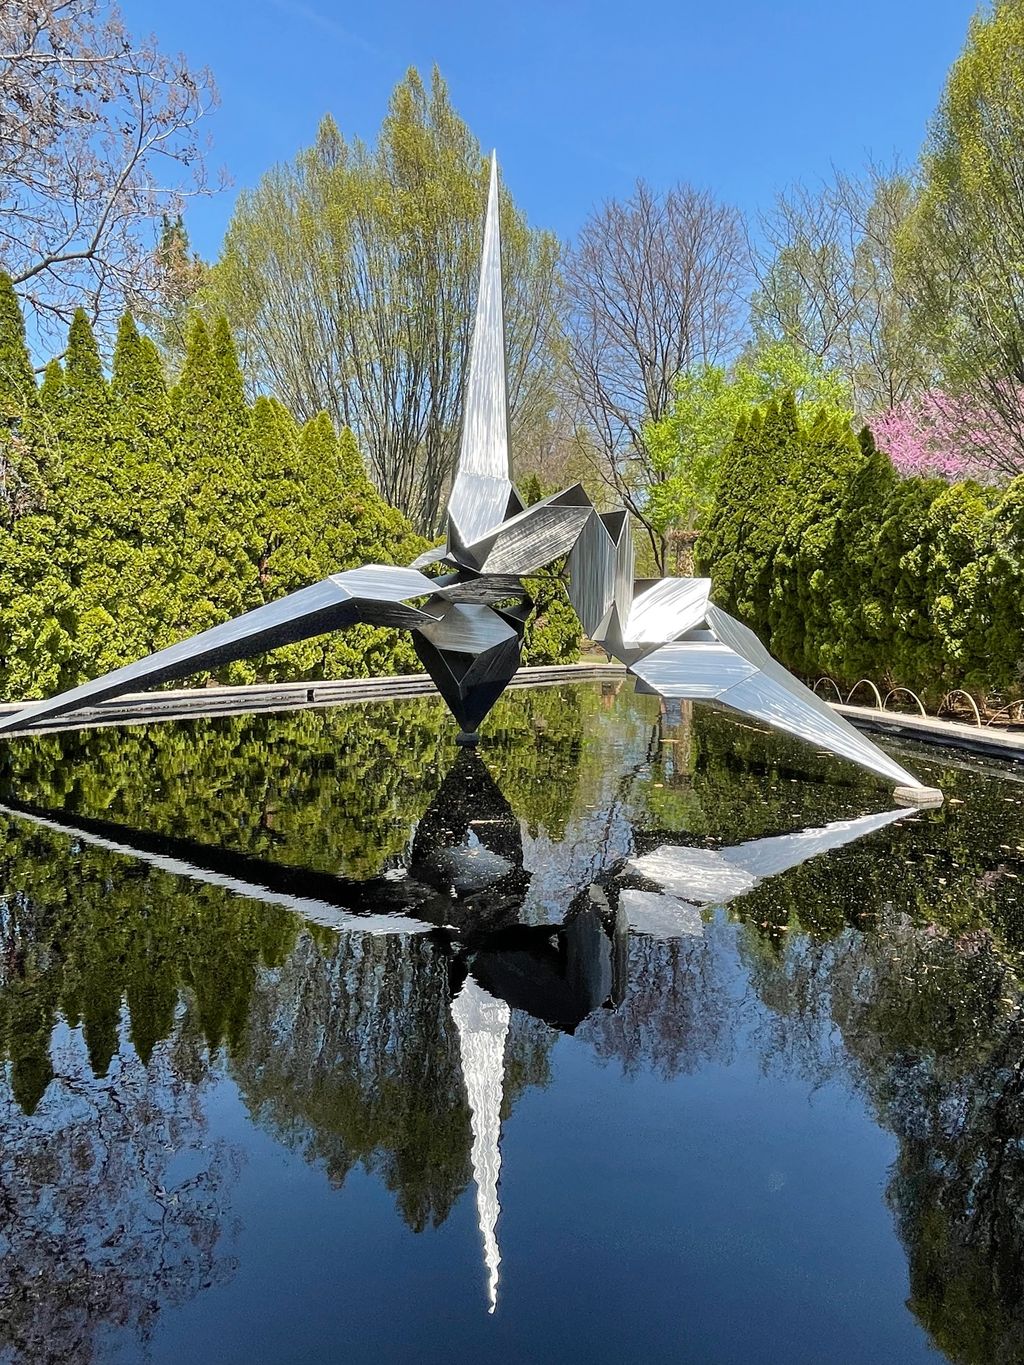 Grounds For Sculpture